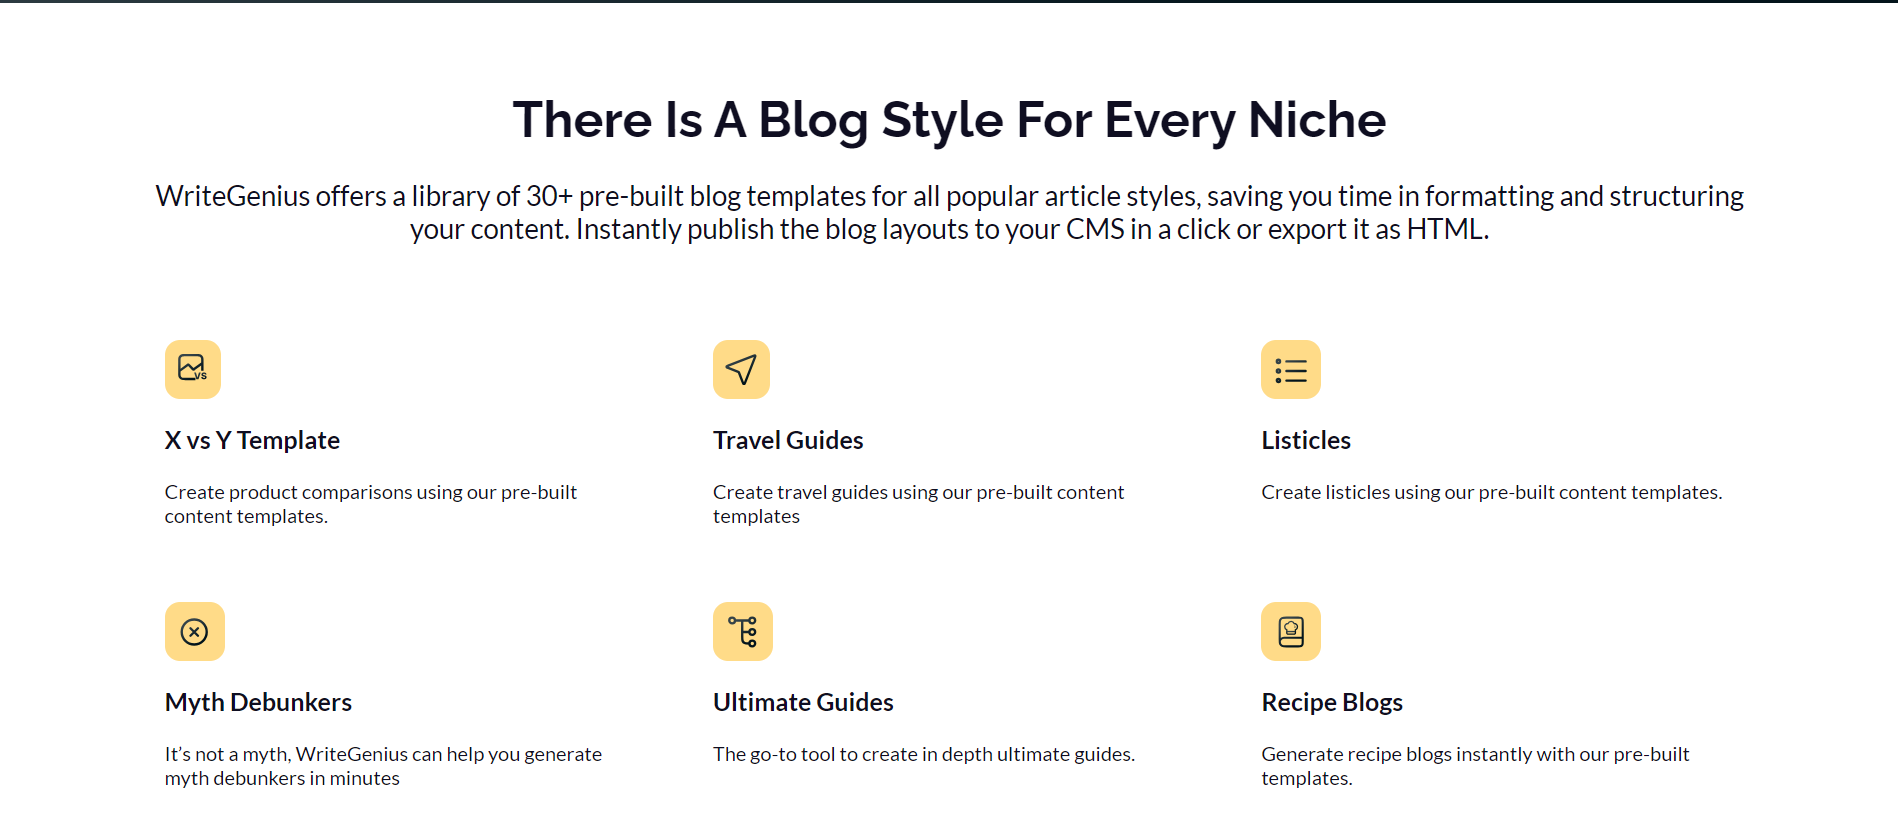 When it comes to its functionalities, WriteGenius stands out from its alternatives with functionalities like X vs Y templates, travel guides, myth debunkers, listicles, ultimate guides, and recipe blogs. 